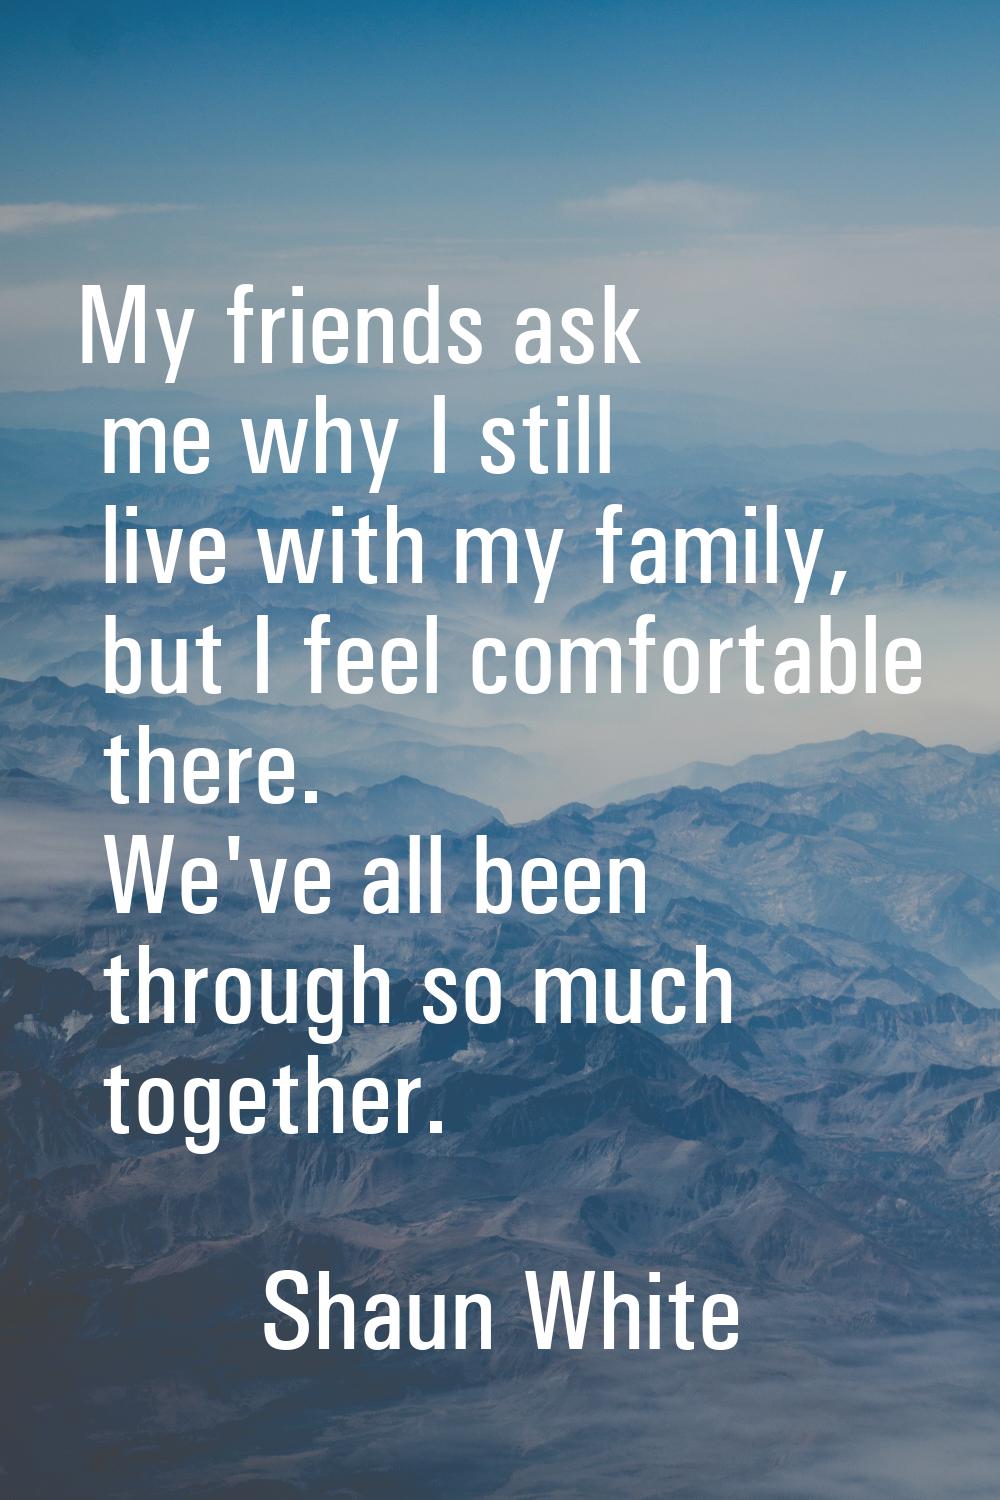 My friends ask me why I still live with my family, but I feel comfortable there. We've all been thr